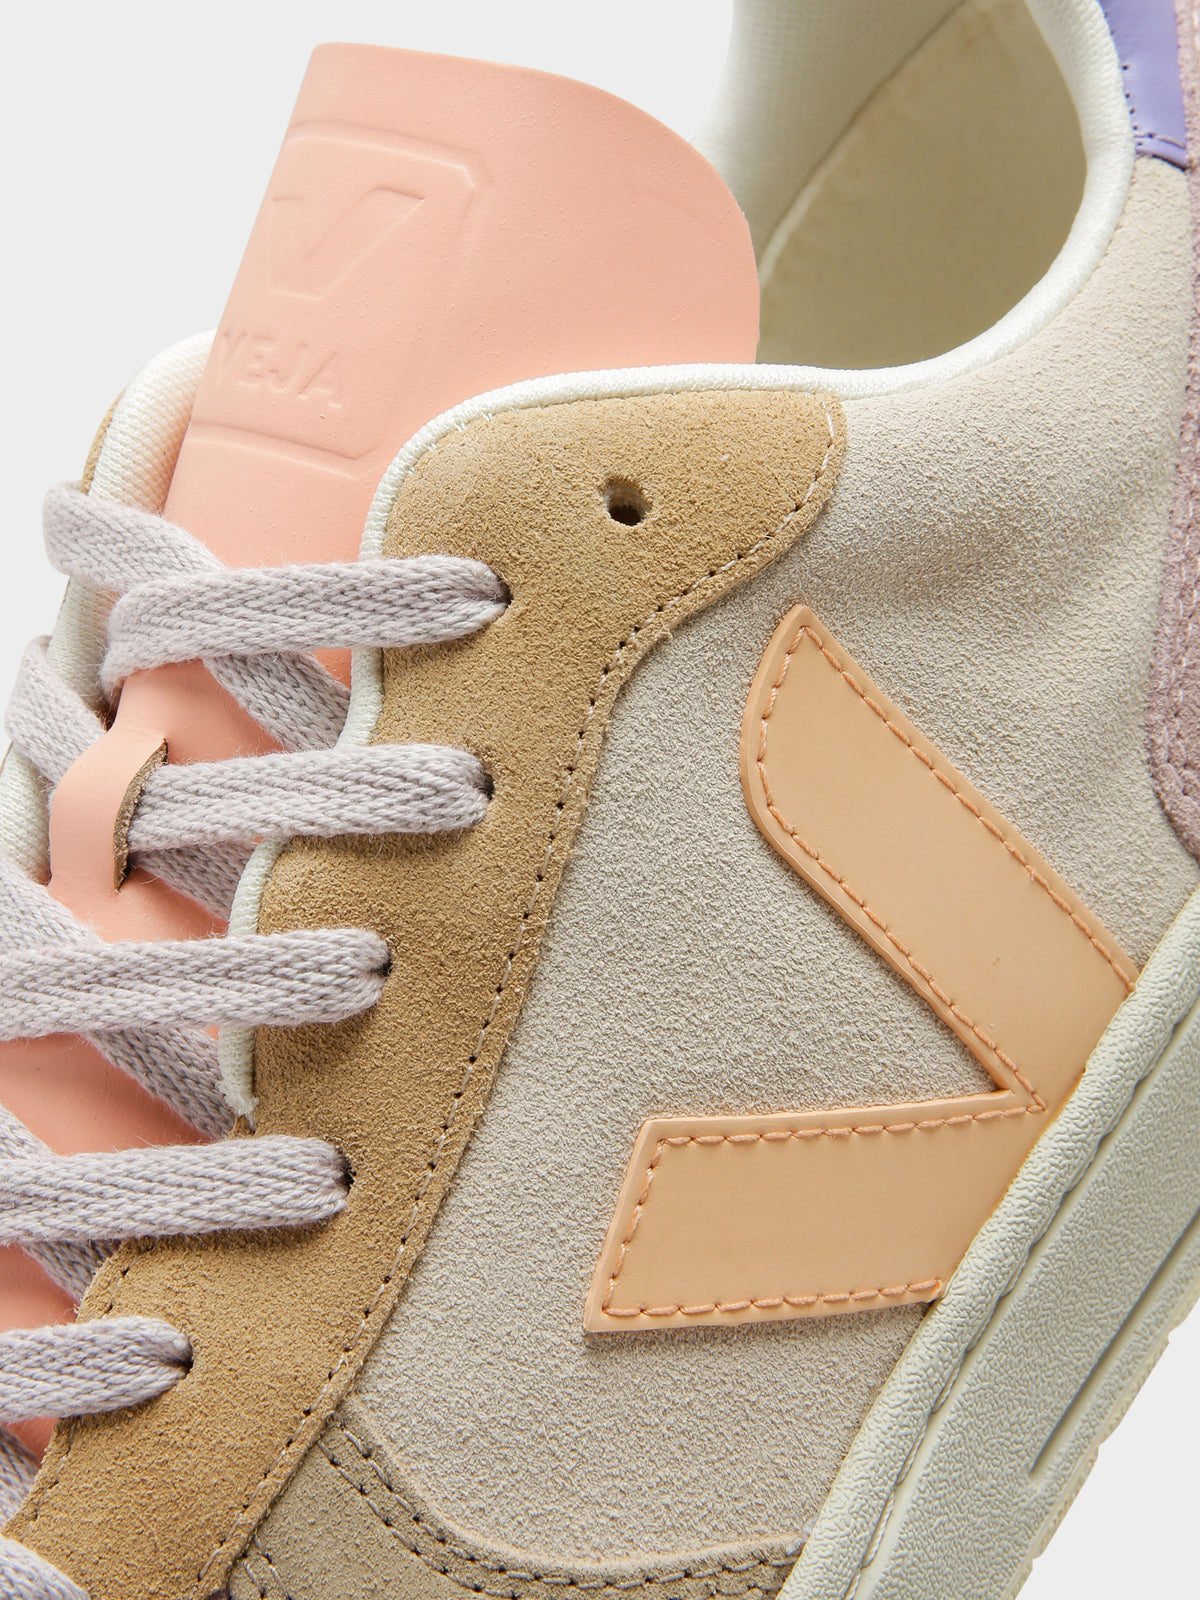 Unisex V-10 Leather Sneakers in Multicolour Peach